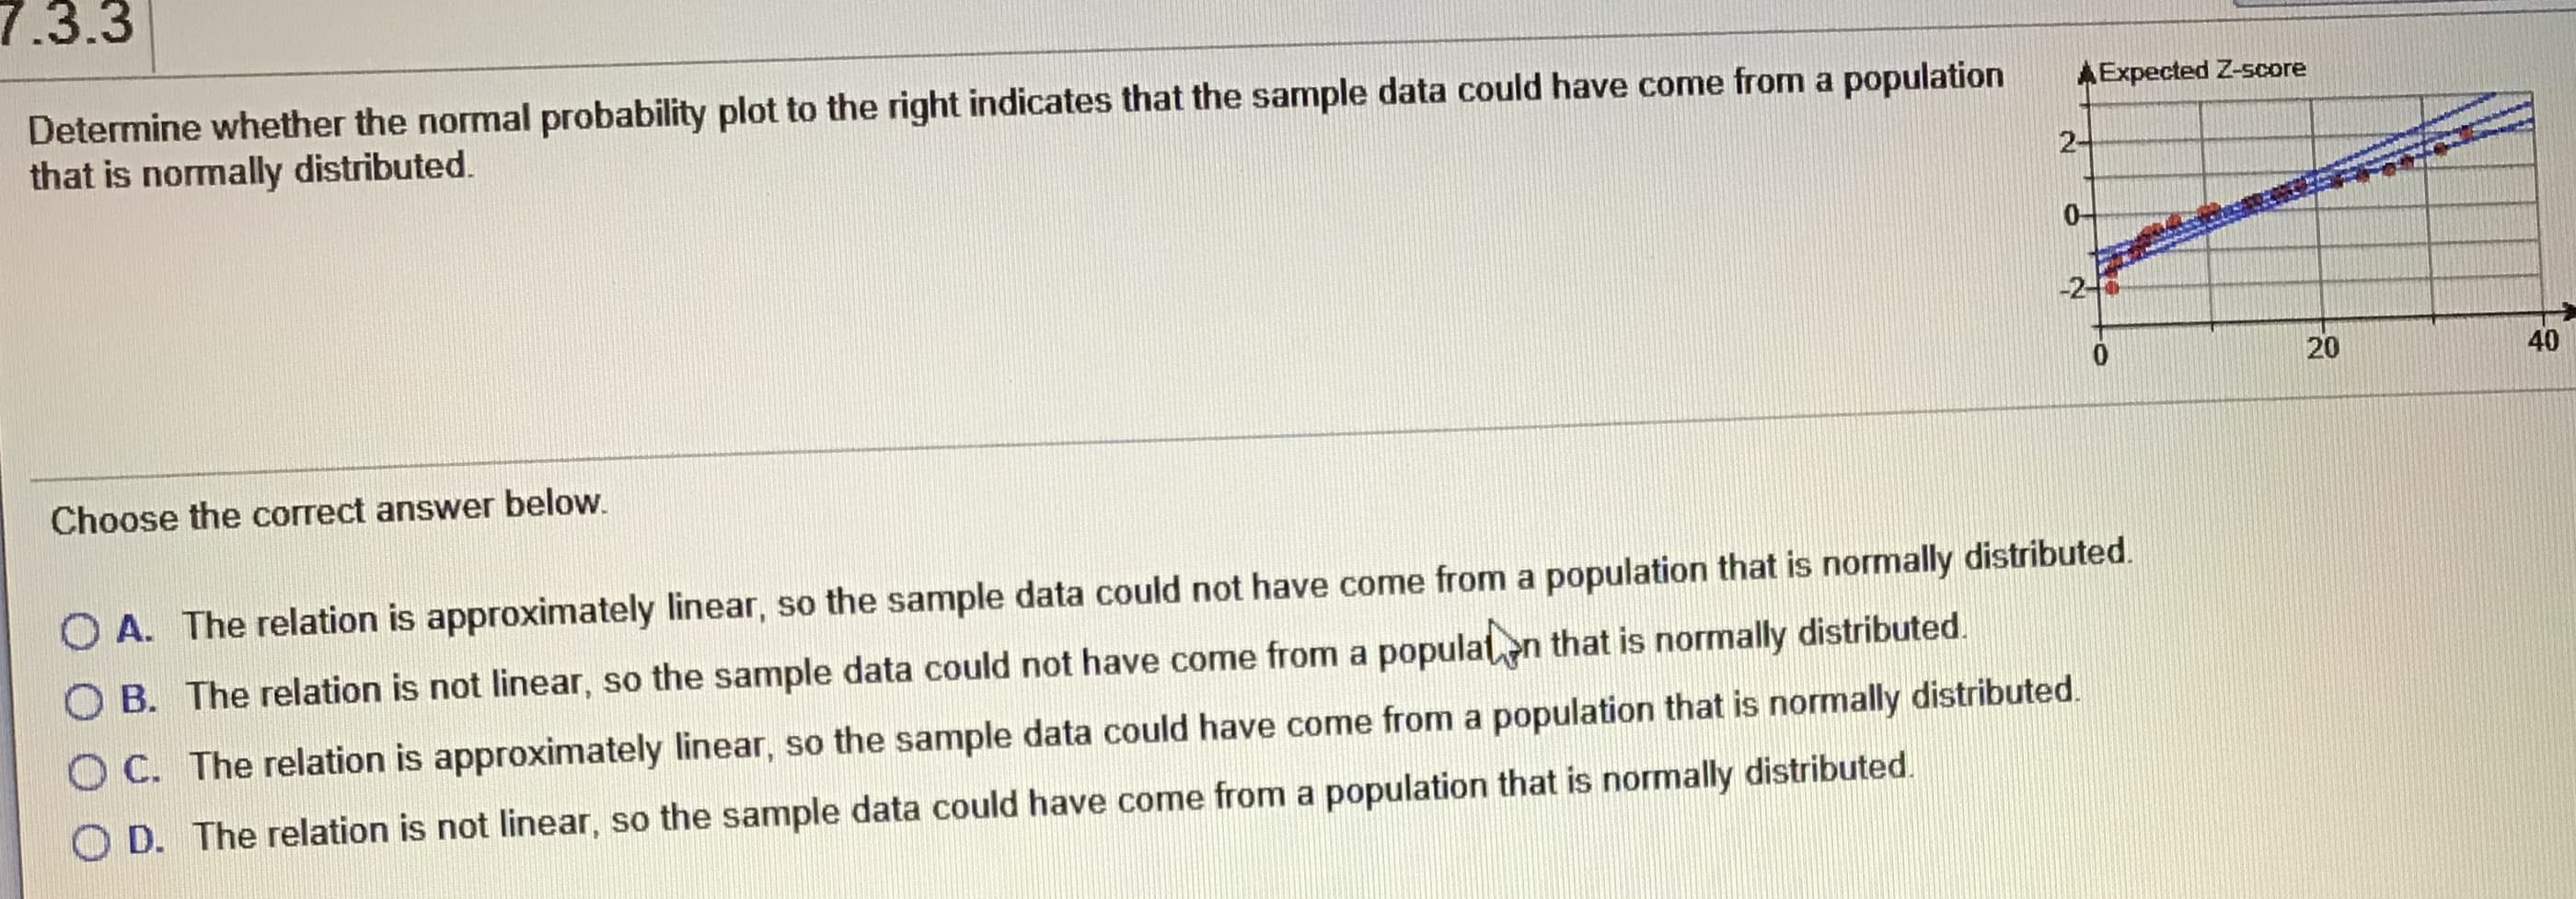 7.3.3
Determine whether the normal probability plot to the right indicates that the sample data could have come from a population
that is normally distributed.
Expected Z-score
2-
20
40
Choose the correct answer below.
O A. The relation is approximately linear, so the sample data could not have come from a population that is normally distributed.
O B. The relation is not linear, so the sample data could not have come from a populaten that is normally distributed.
O C. The relation is approximately linear, so the sample data could have come from a population that is normally distributed.
O D. The relation is not linear, so the sample data could have come from a population that is normally distributed.
